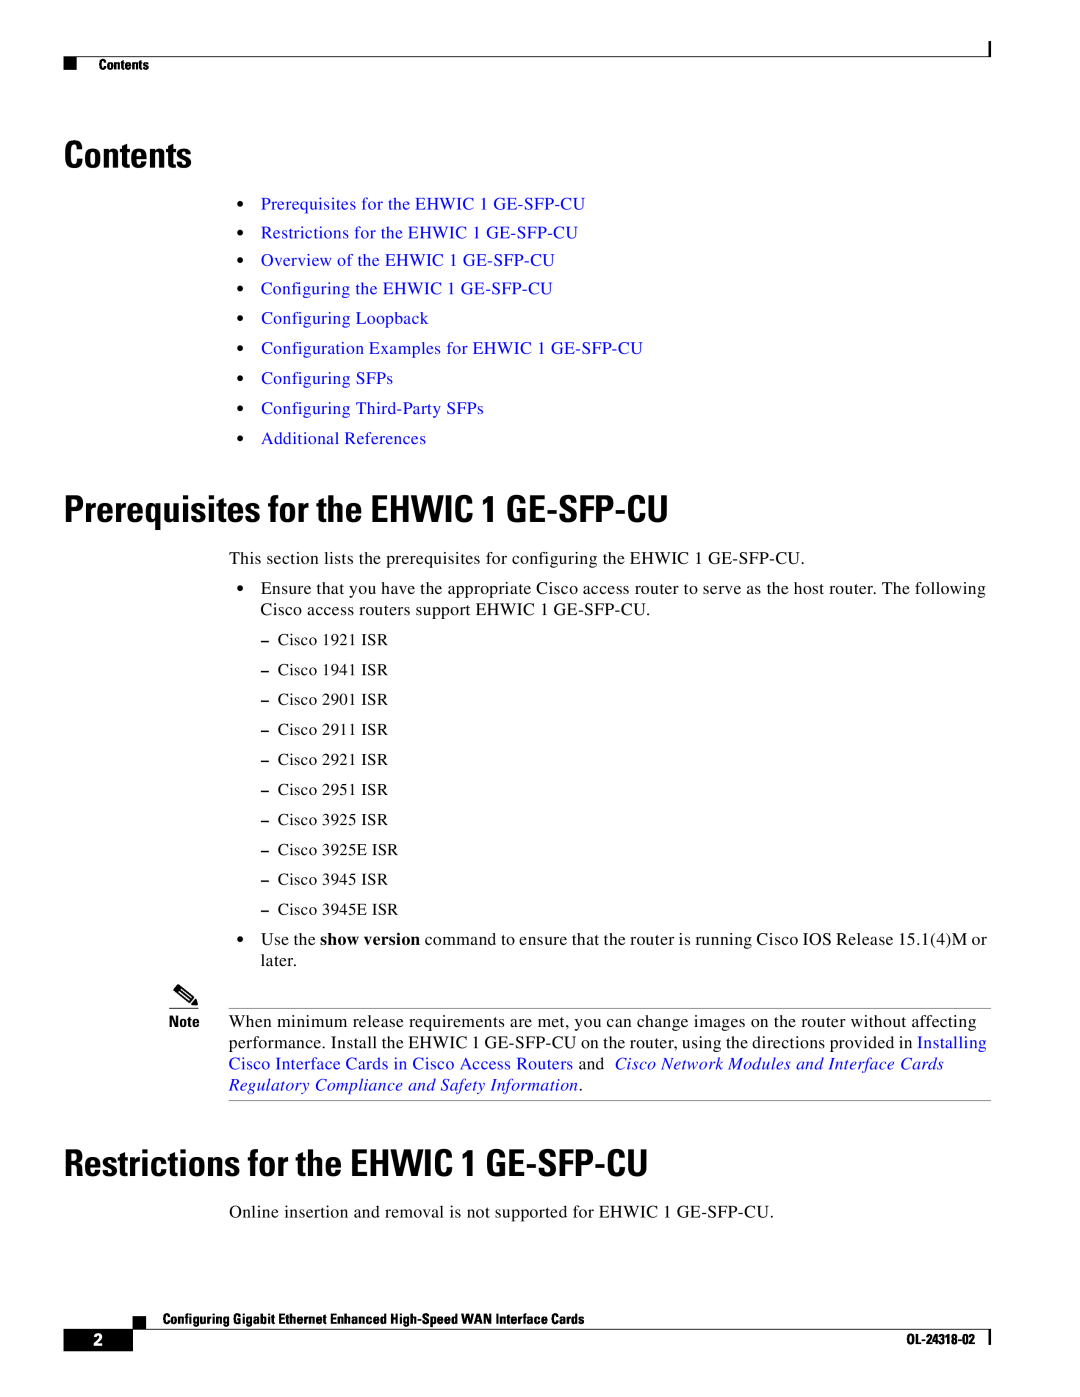 Cisco Systems EHWIC1GESFPCU Contents, Prerequisites for the EHWIC 1 GE-SFP-CU, Restrictions for the EHWIC 1 GE-SFP-CU 